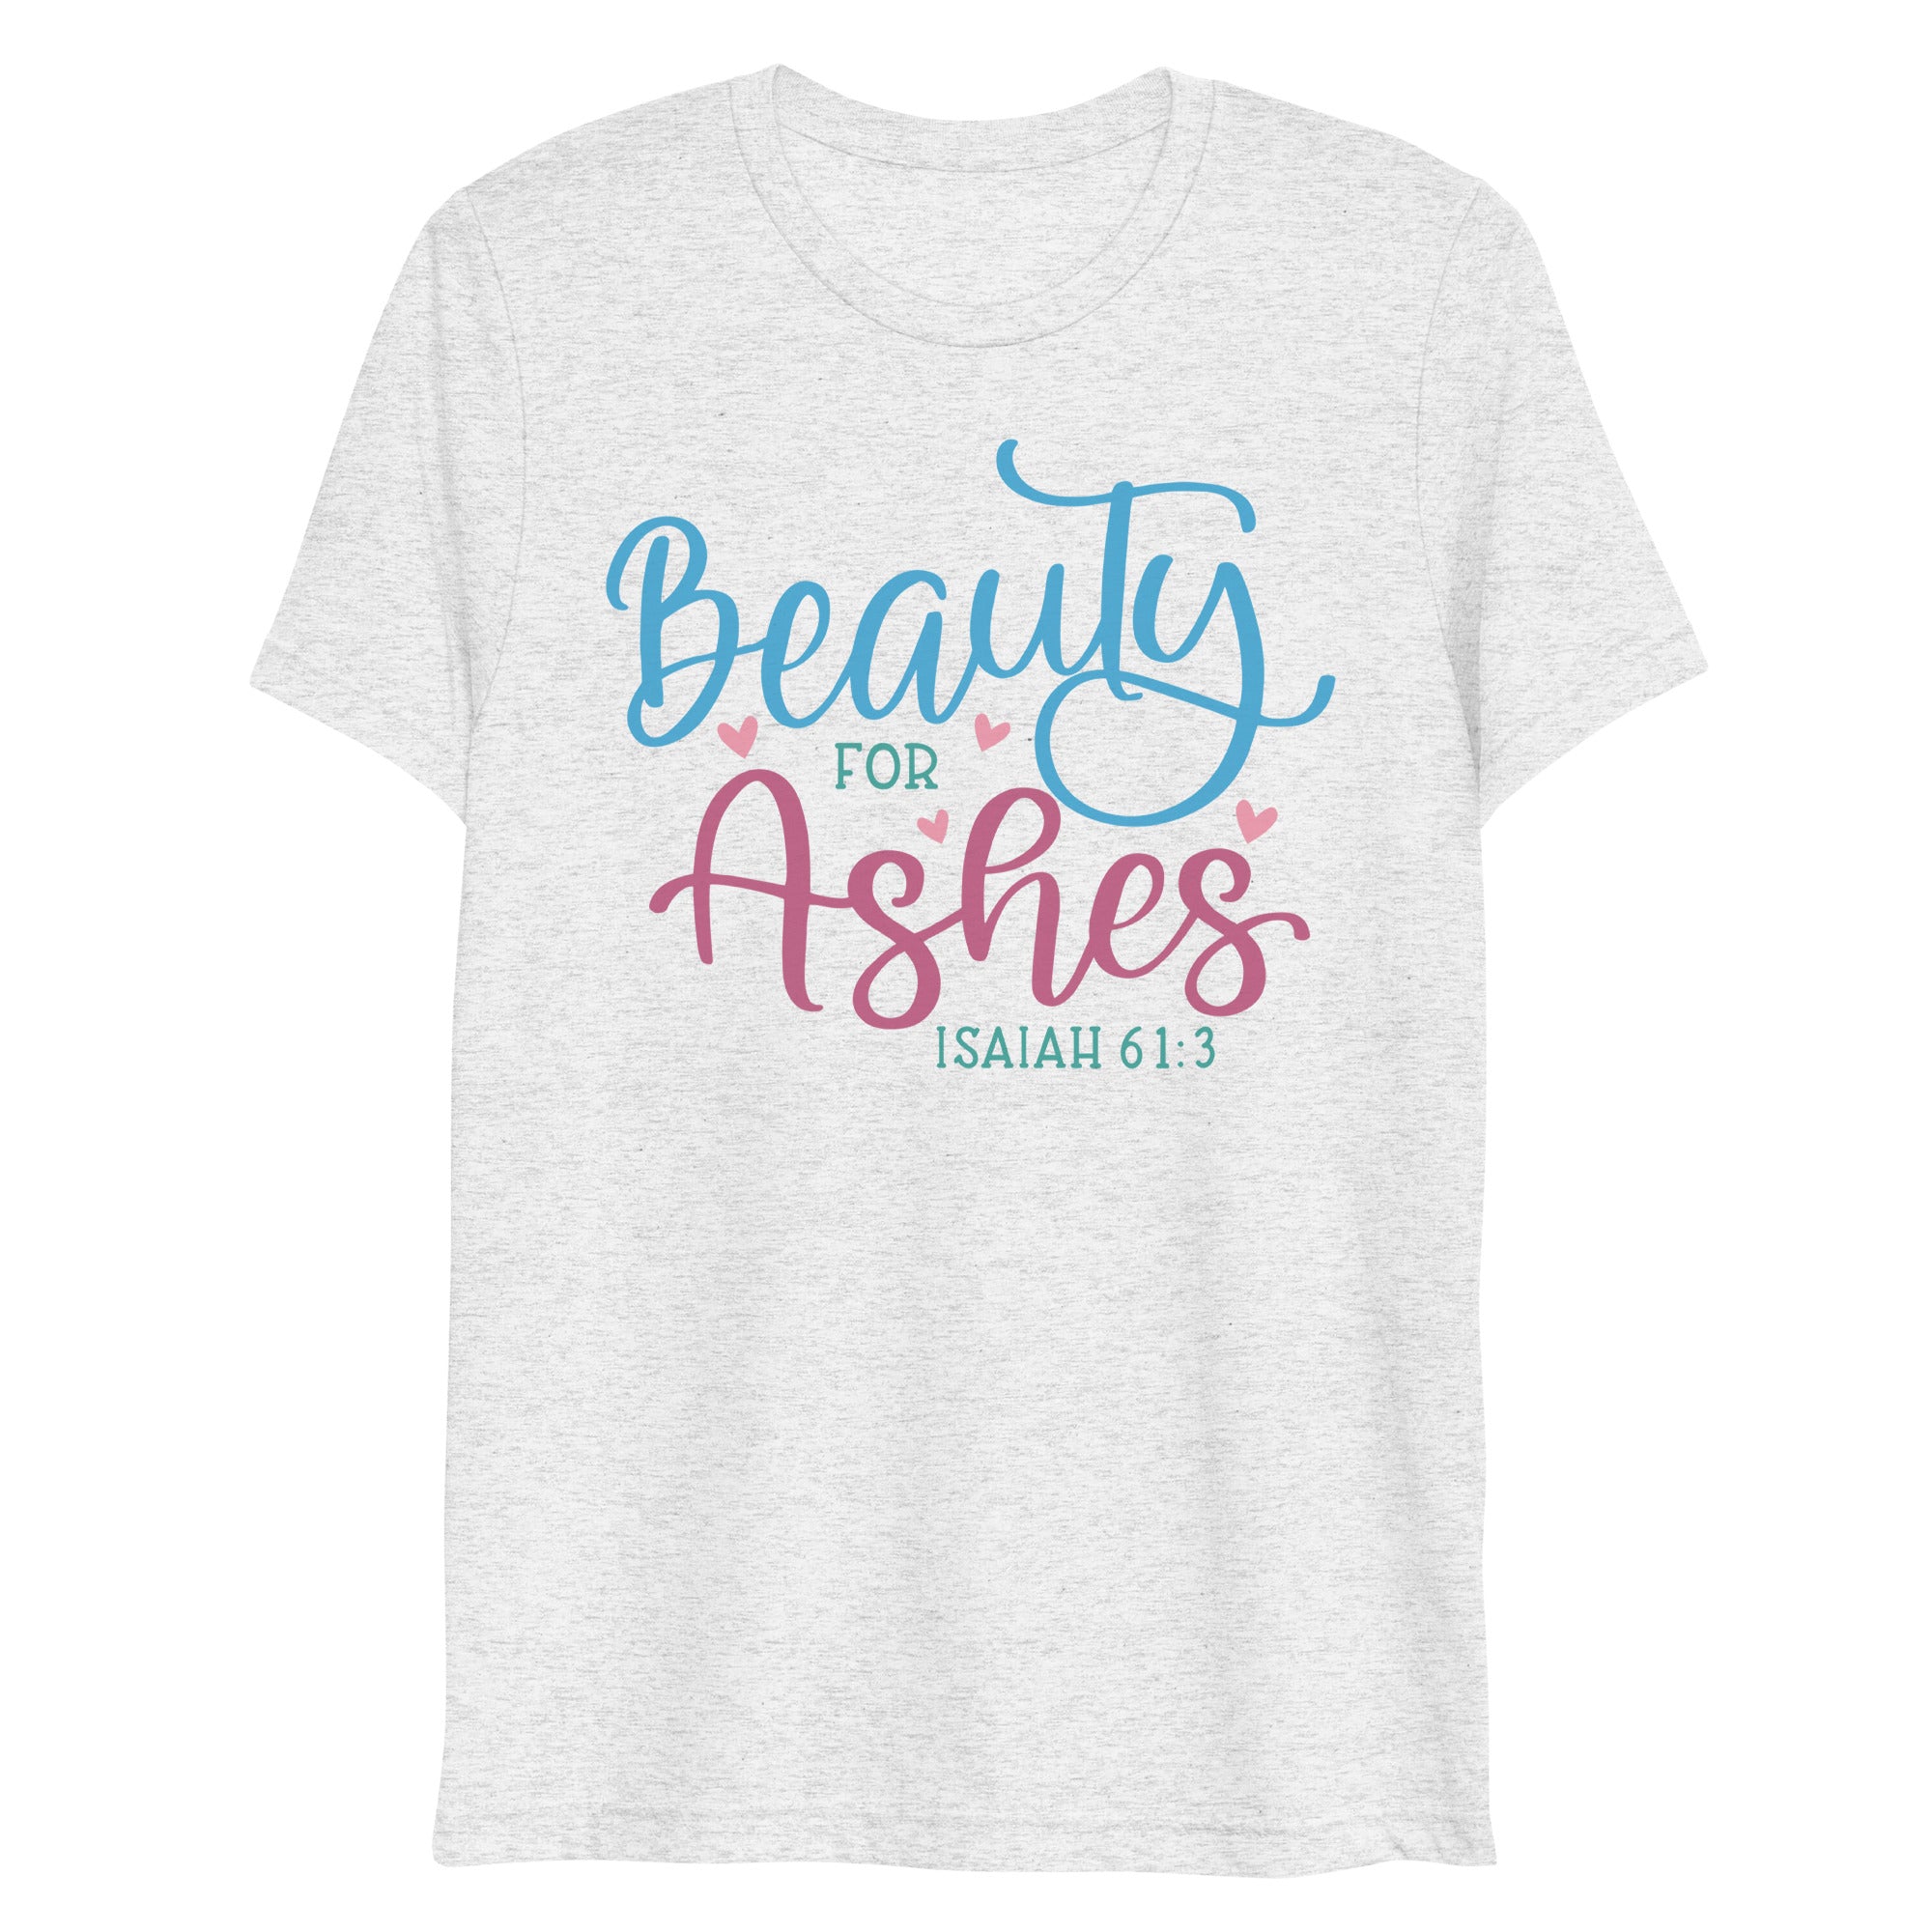 Beauty For Ashes - Isaiah 61:3 - Women's Tri-Blend T-Shirt